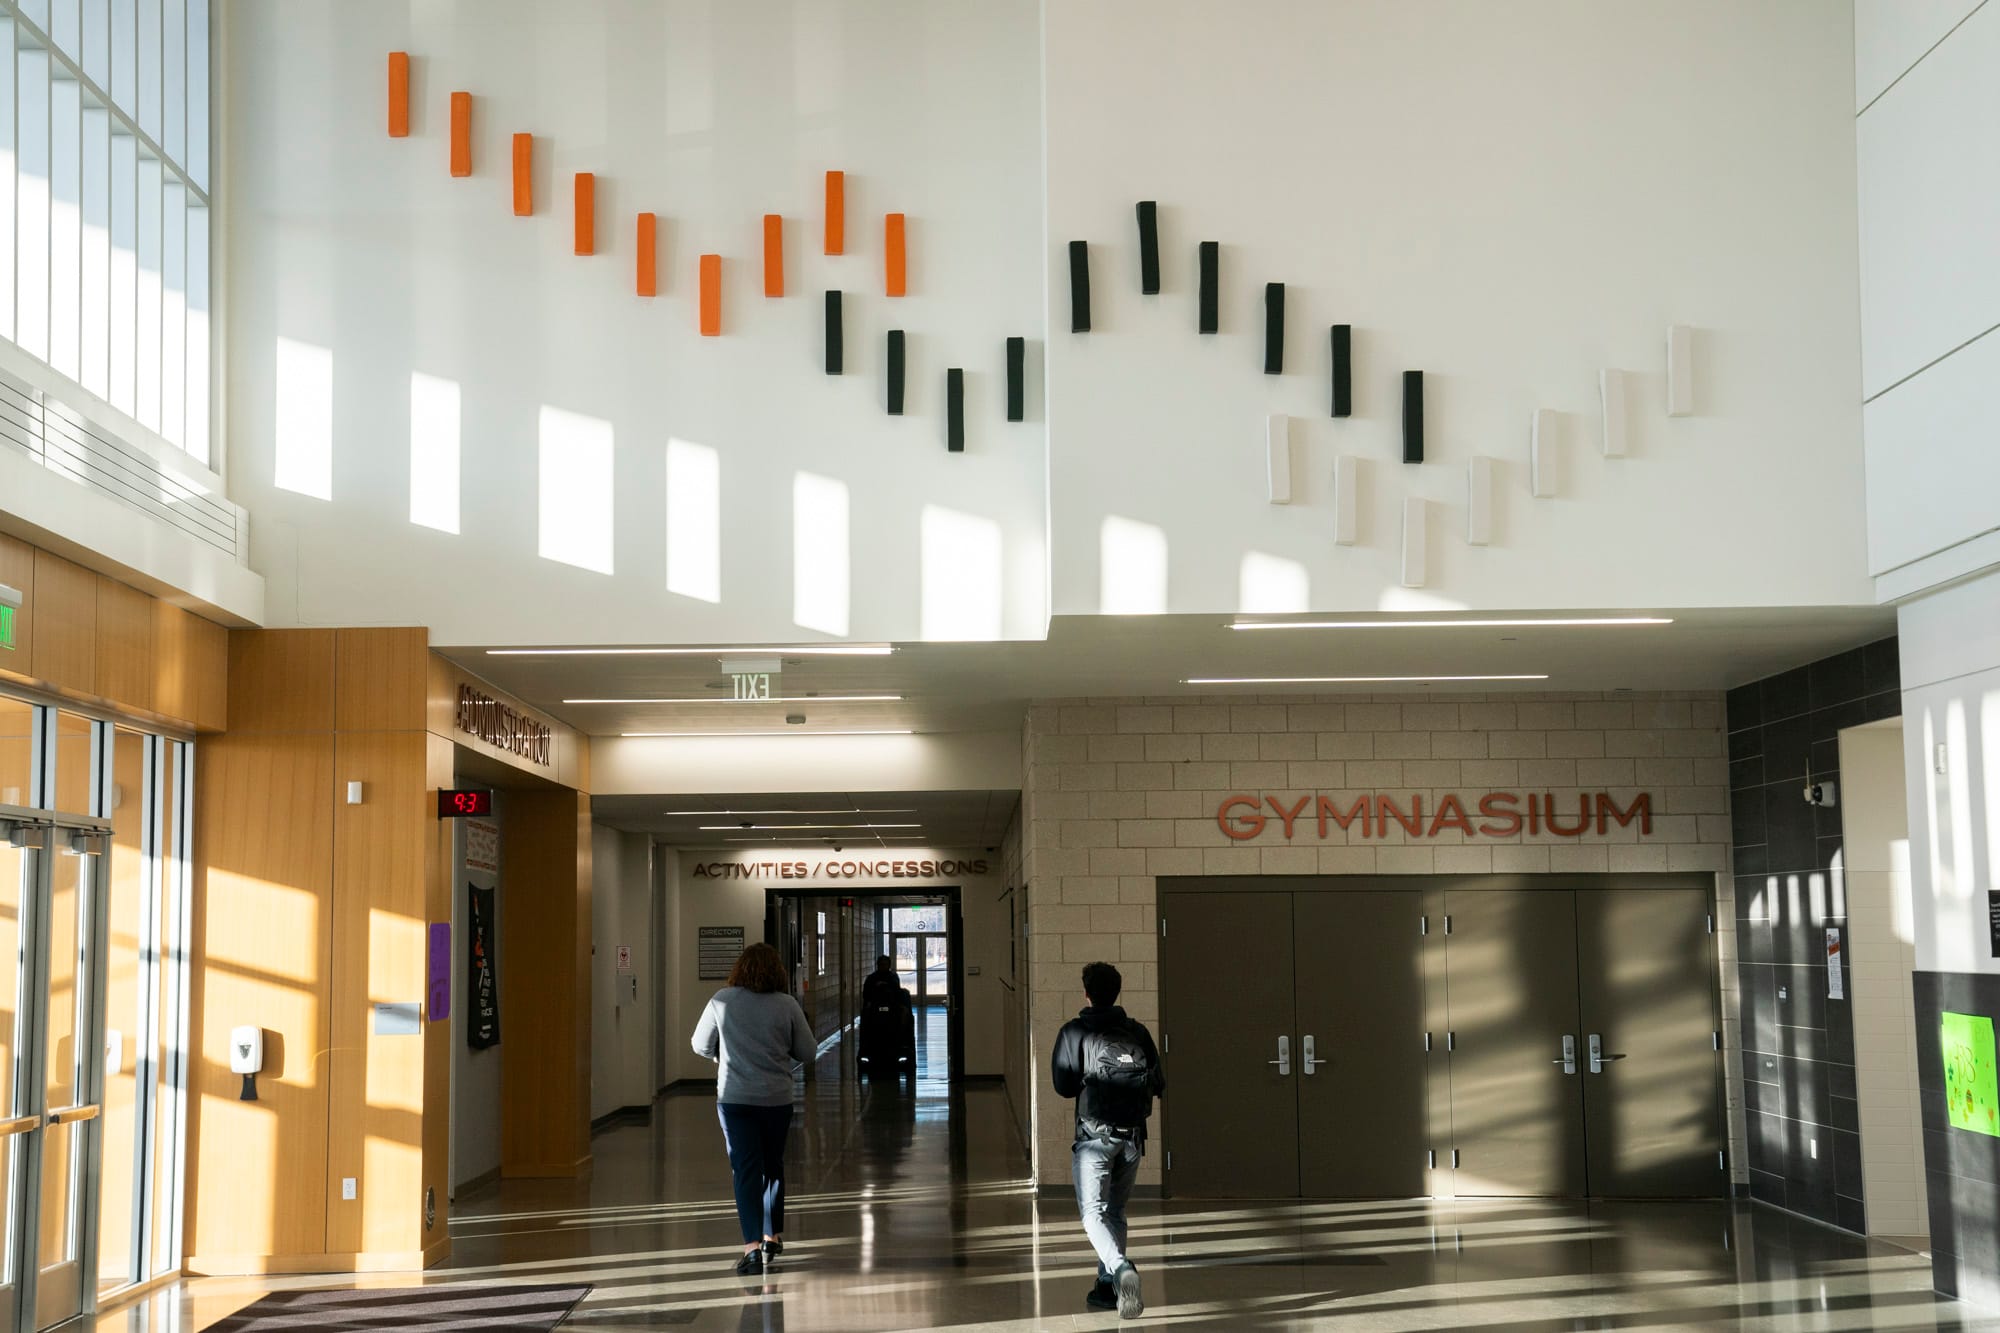 A ceramic pottery art installation is seen on a wall in a high school lobby. Its colors are orange, black and white, the school's colors. 